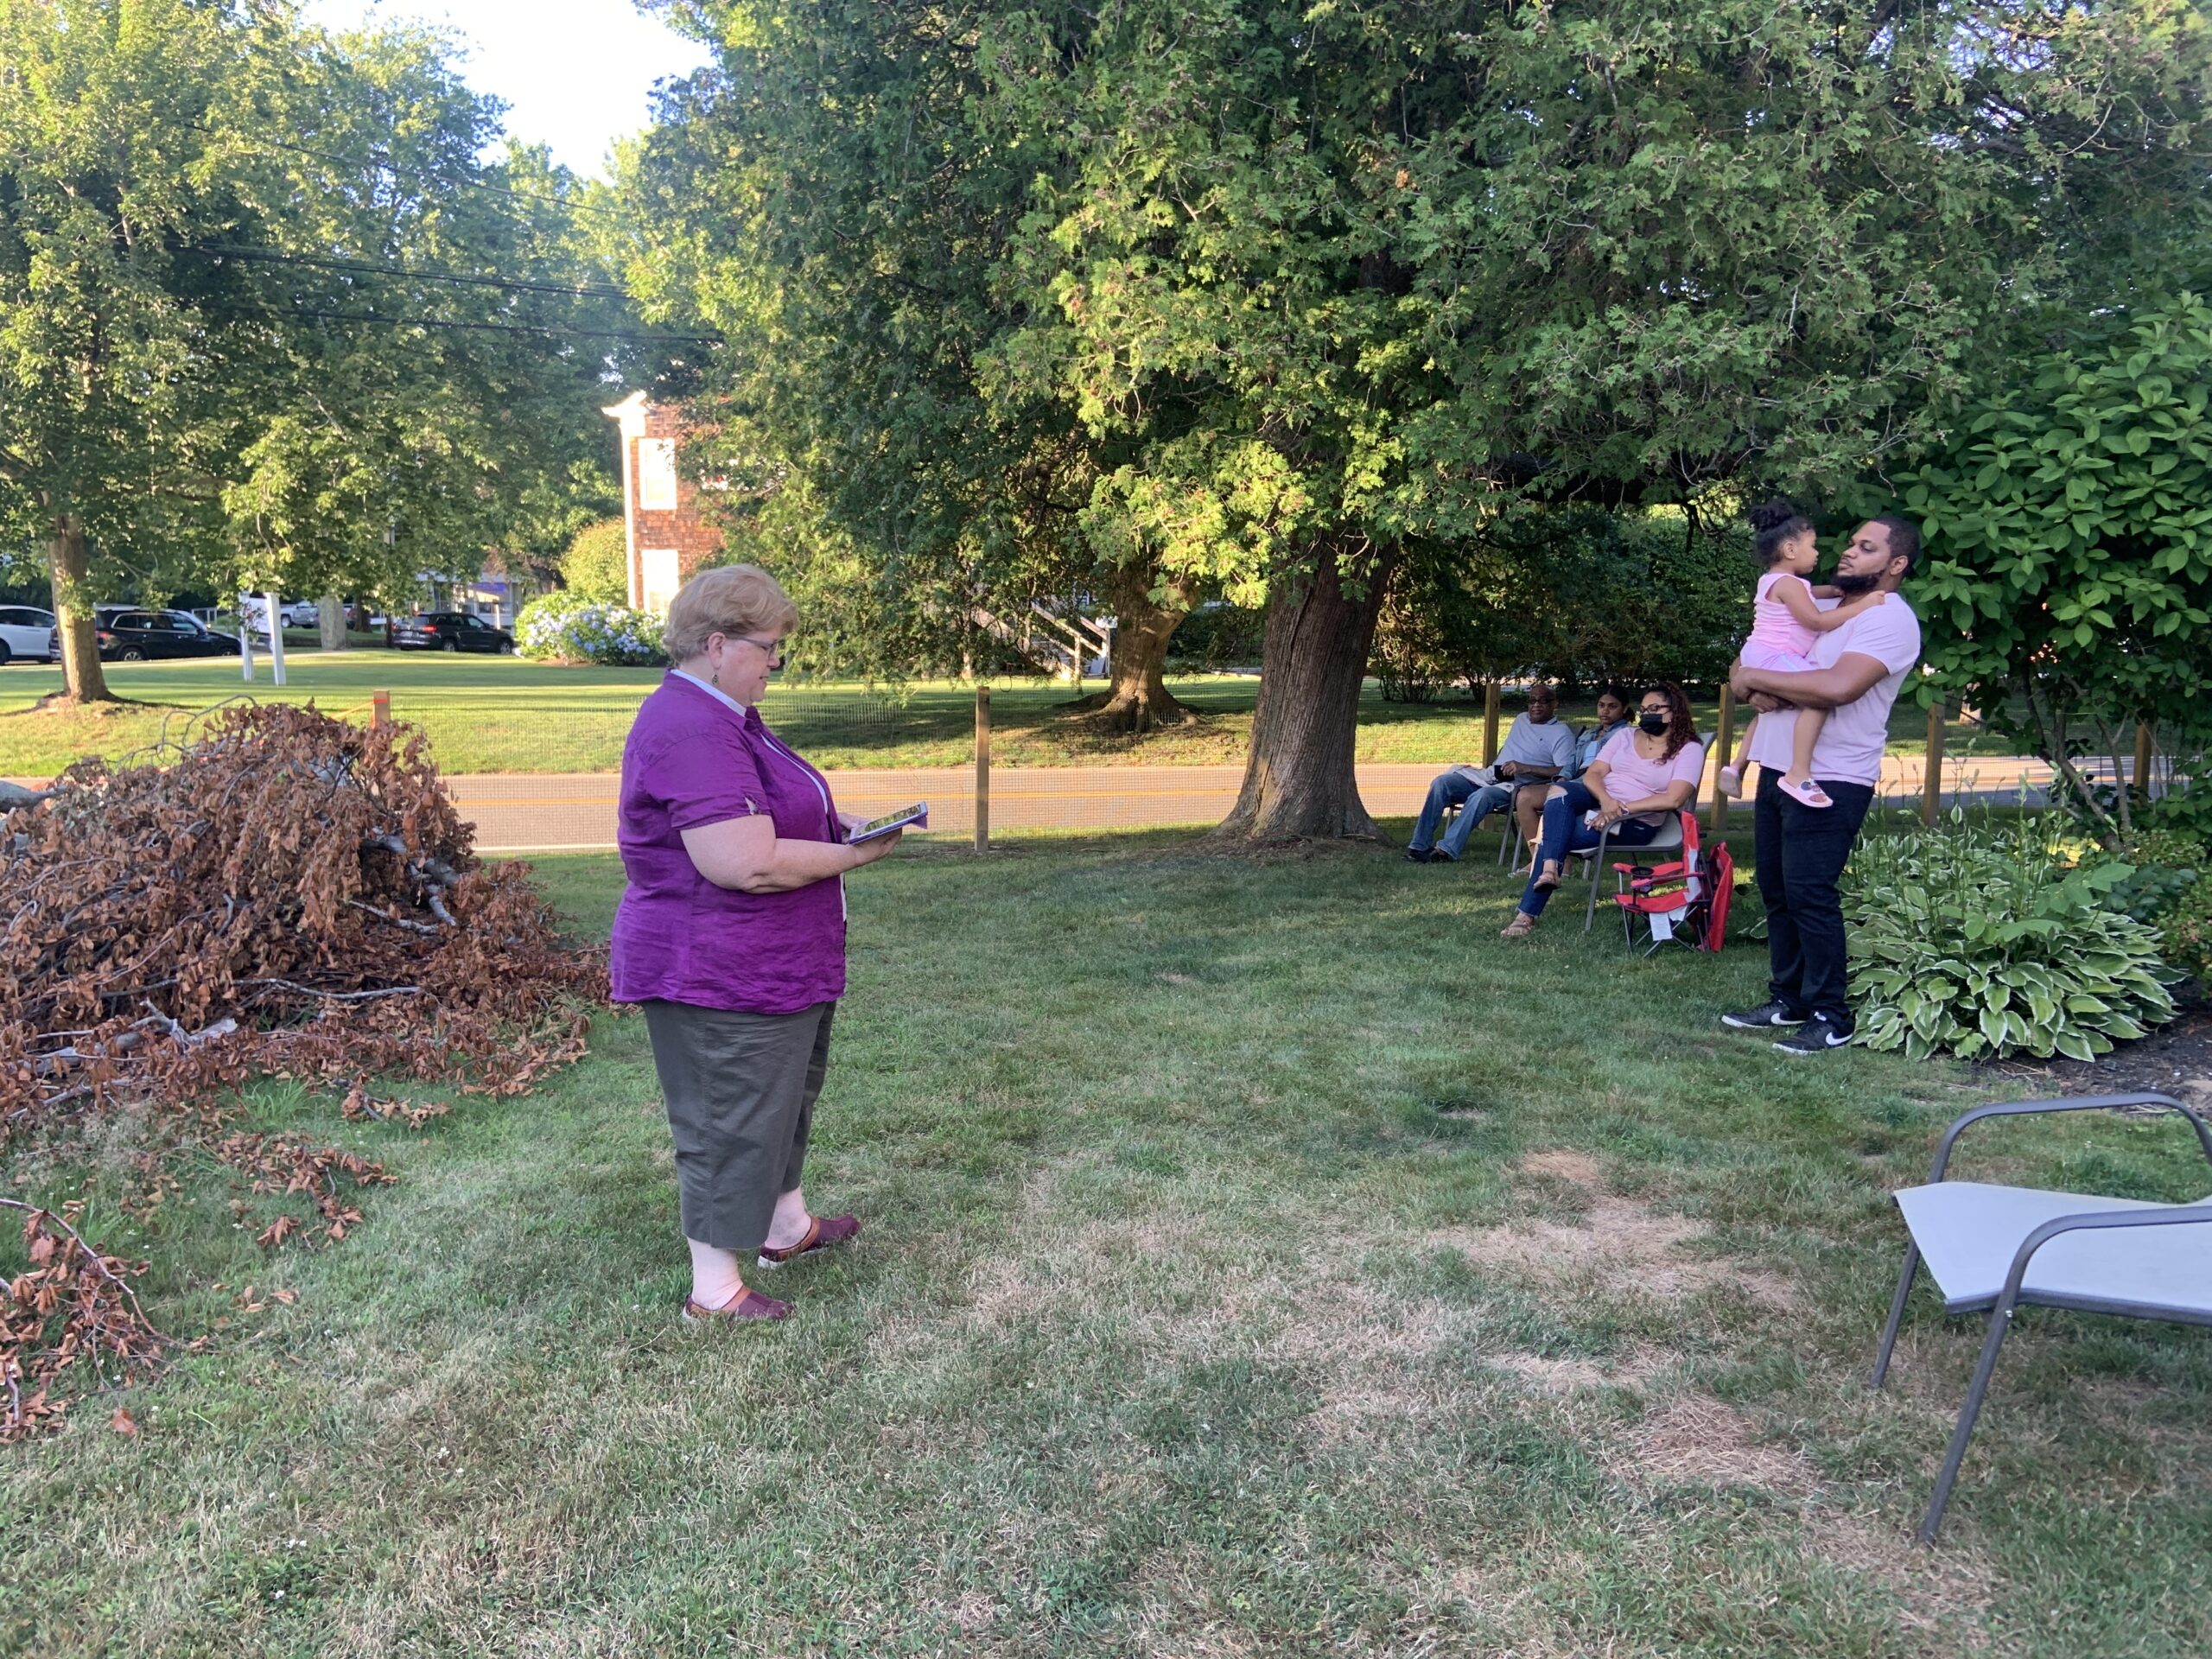 The Reverend Joanne Utley leads a prayer service at the foot of a damaged and diseased European weeping beech next to the former Bridgehampton United Methodist Church, which will be removed in the coming days. STEPHEN J. KOTZ